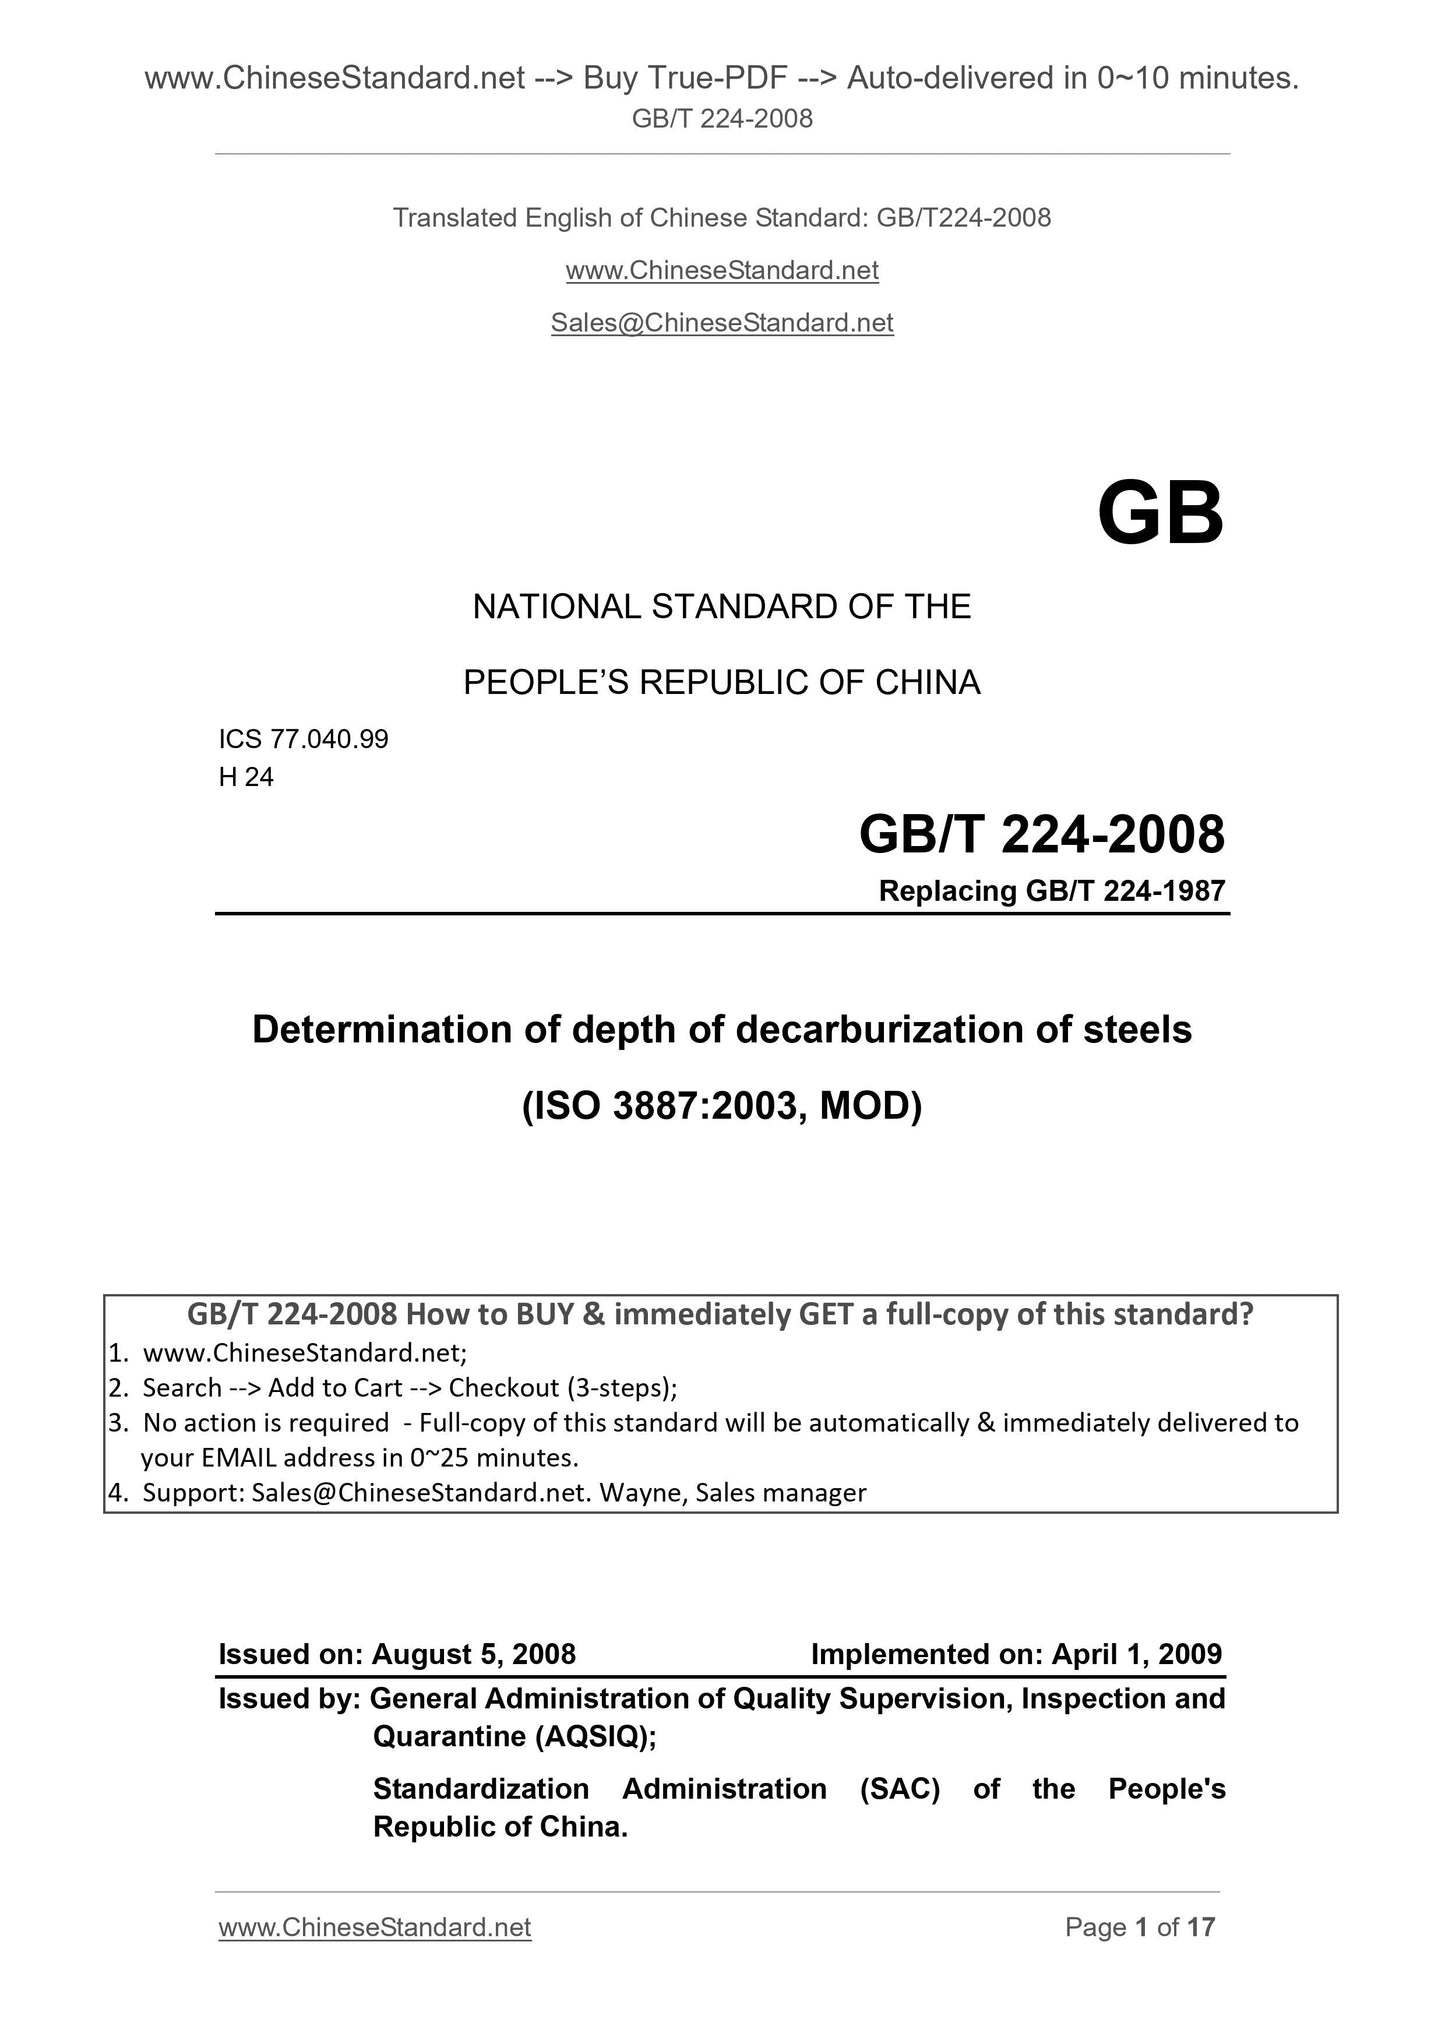 GB/T 224-2008 Page 1